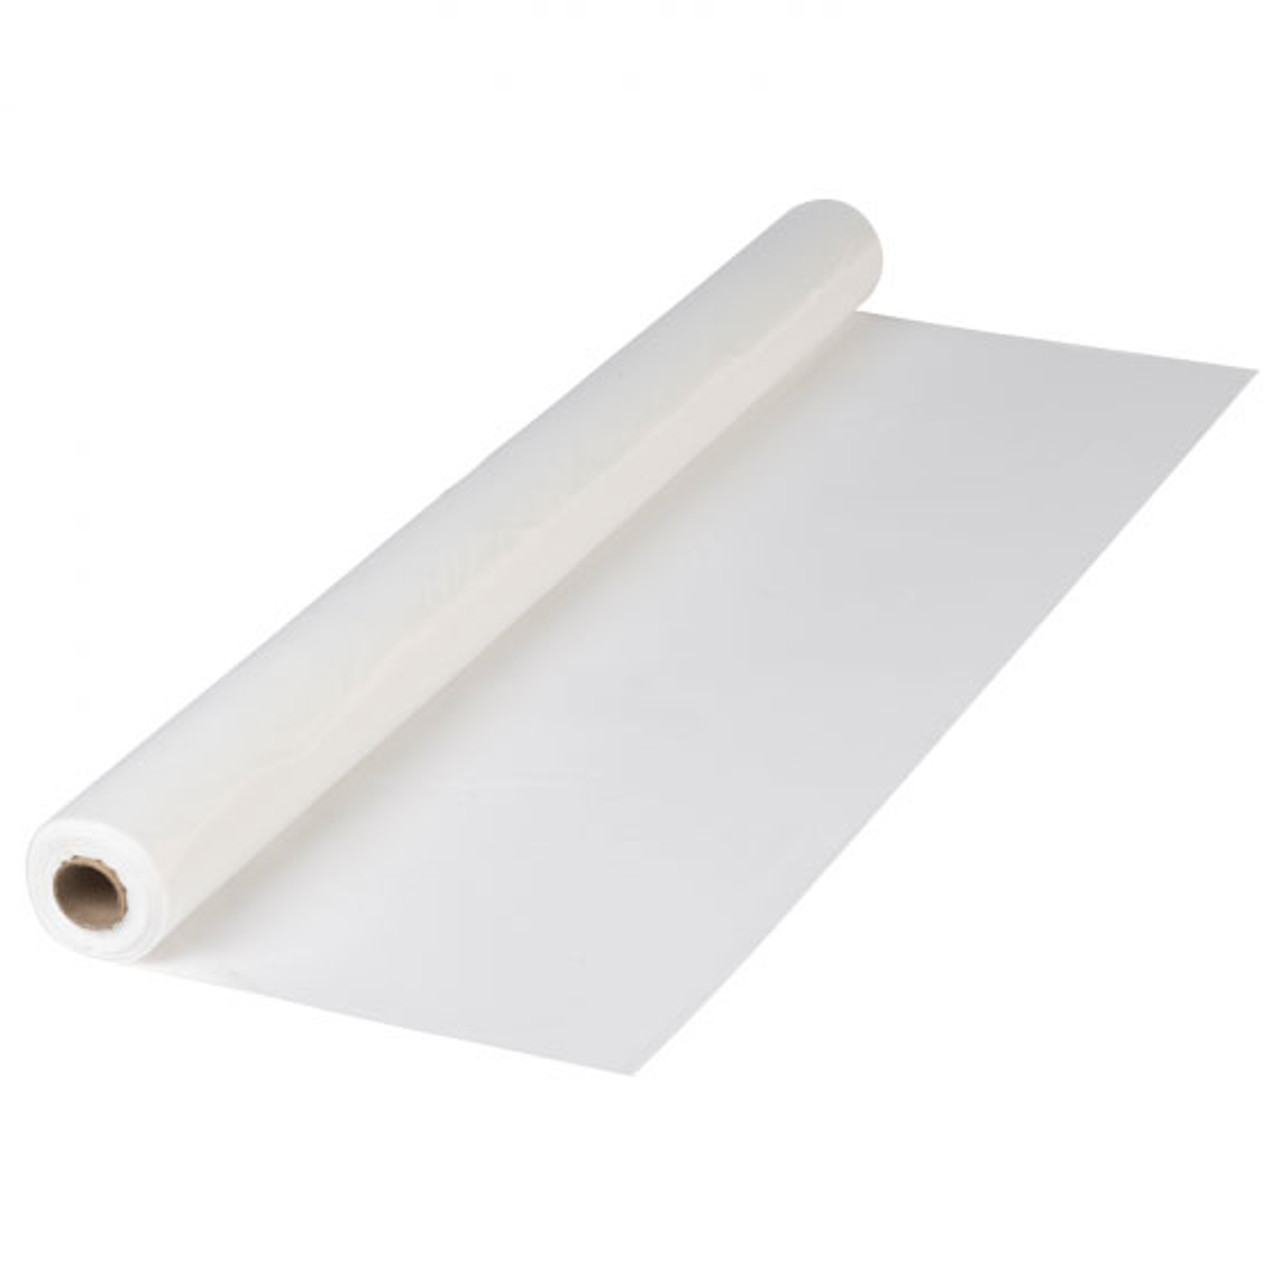 Hoffmaster VPT30040 40 x 300' White Plastic Table Cover Roll